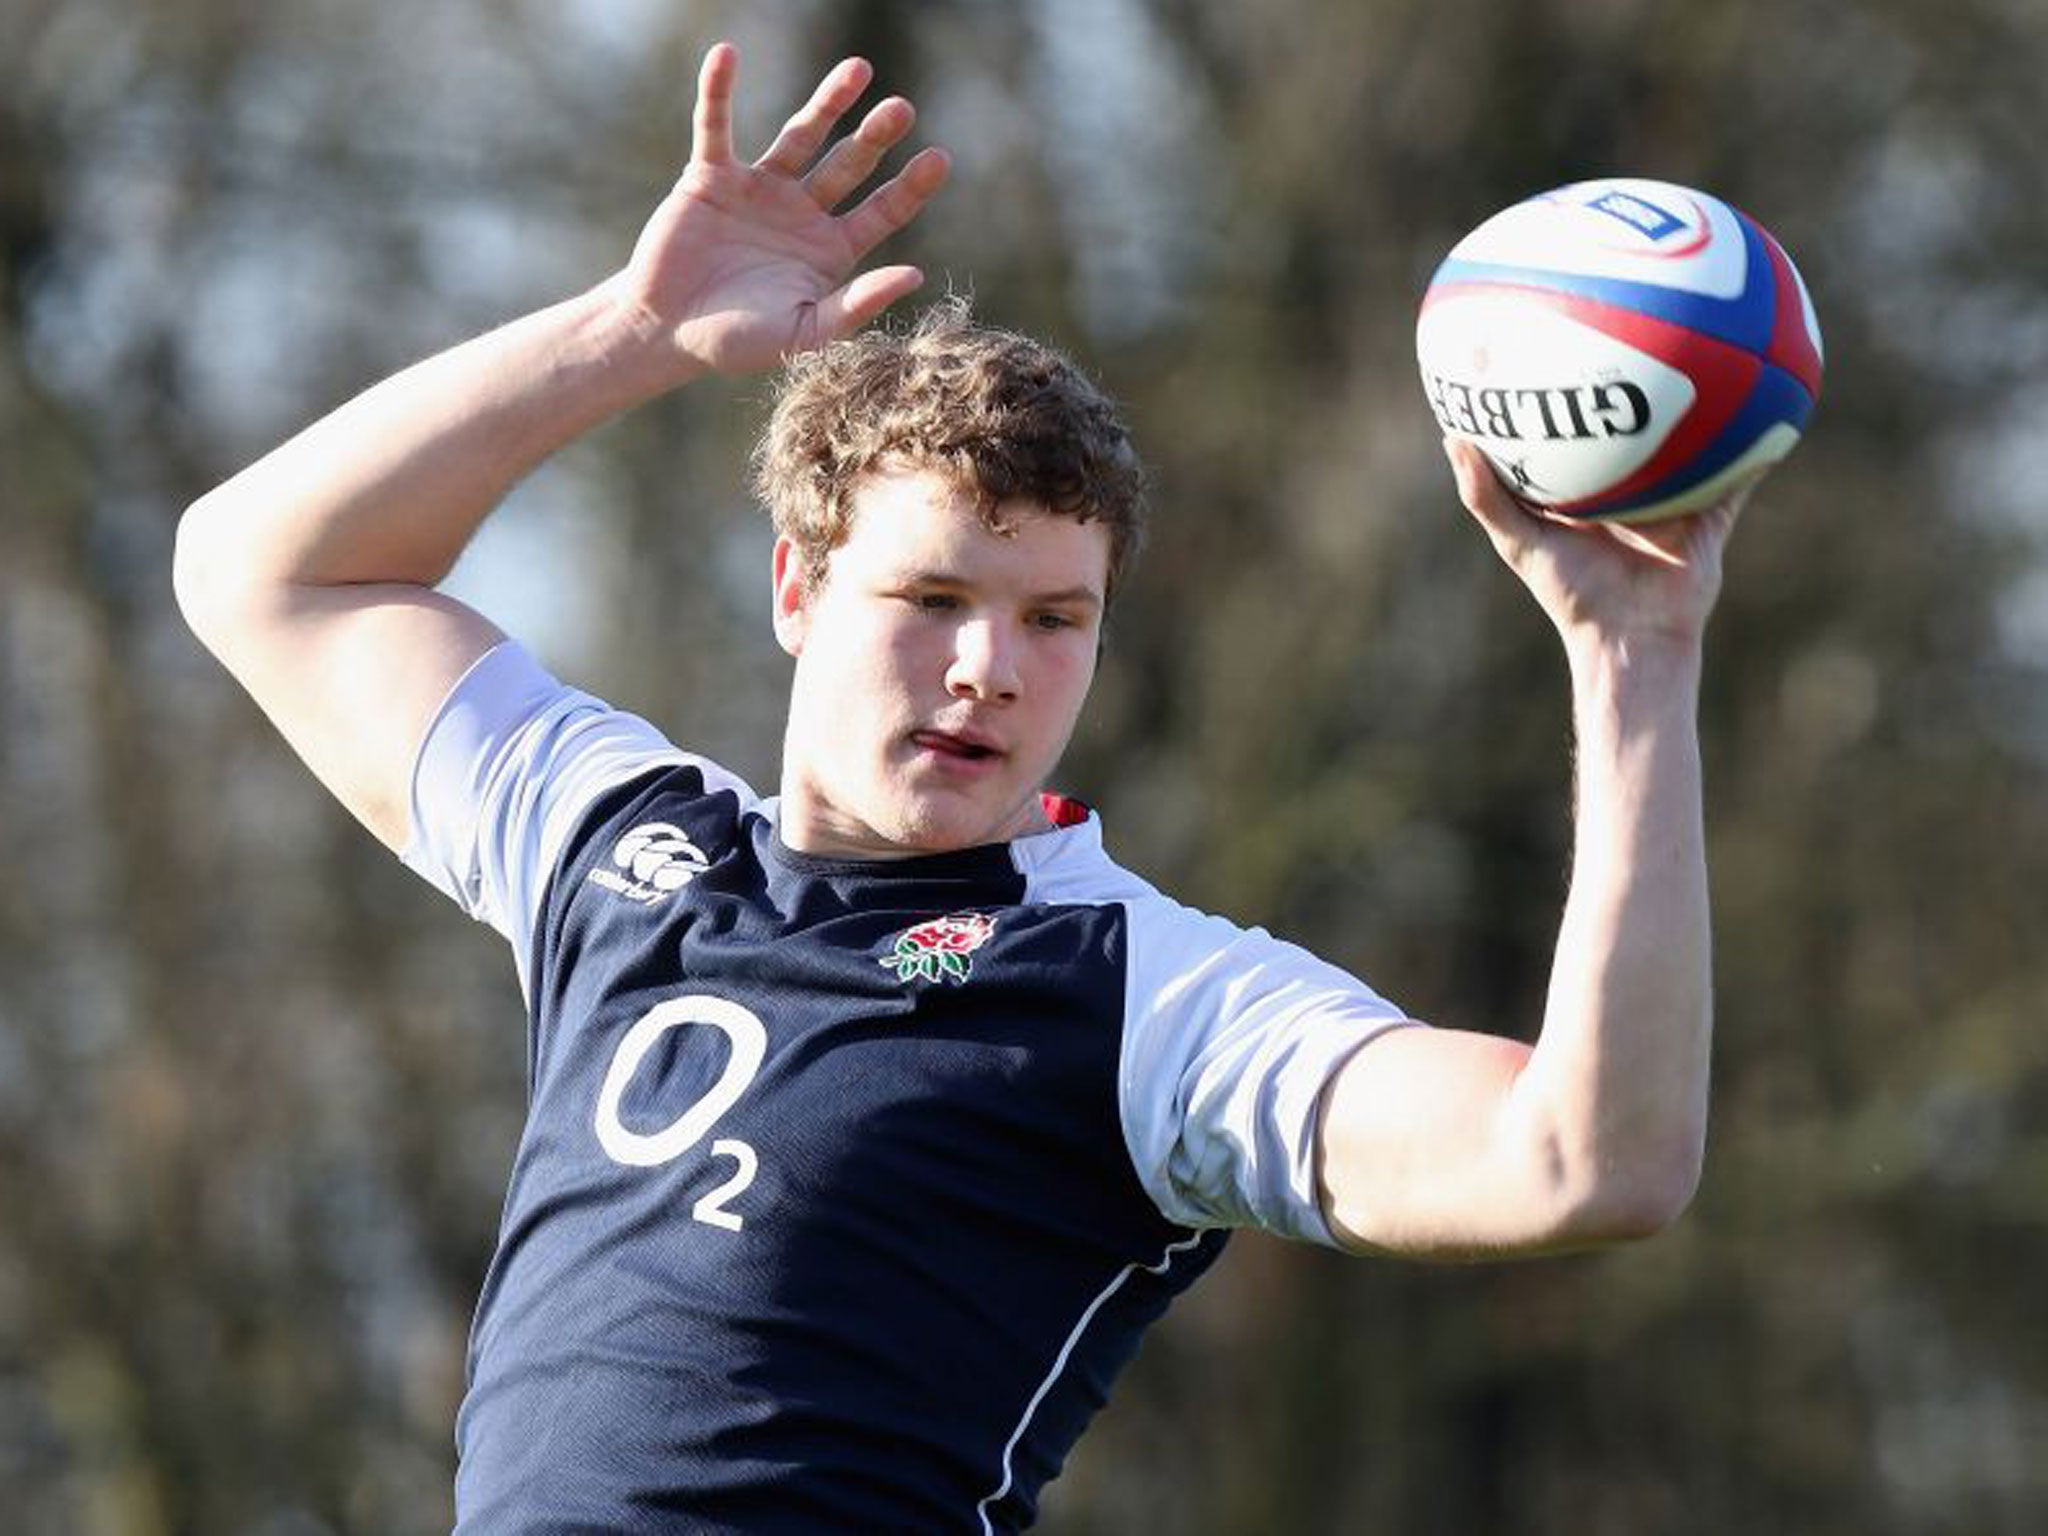 Joe Launchbury has quickly established himself for Wasps and England